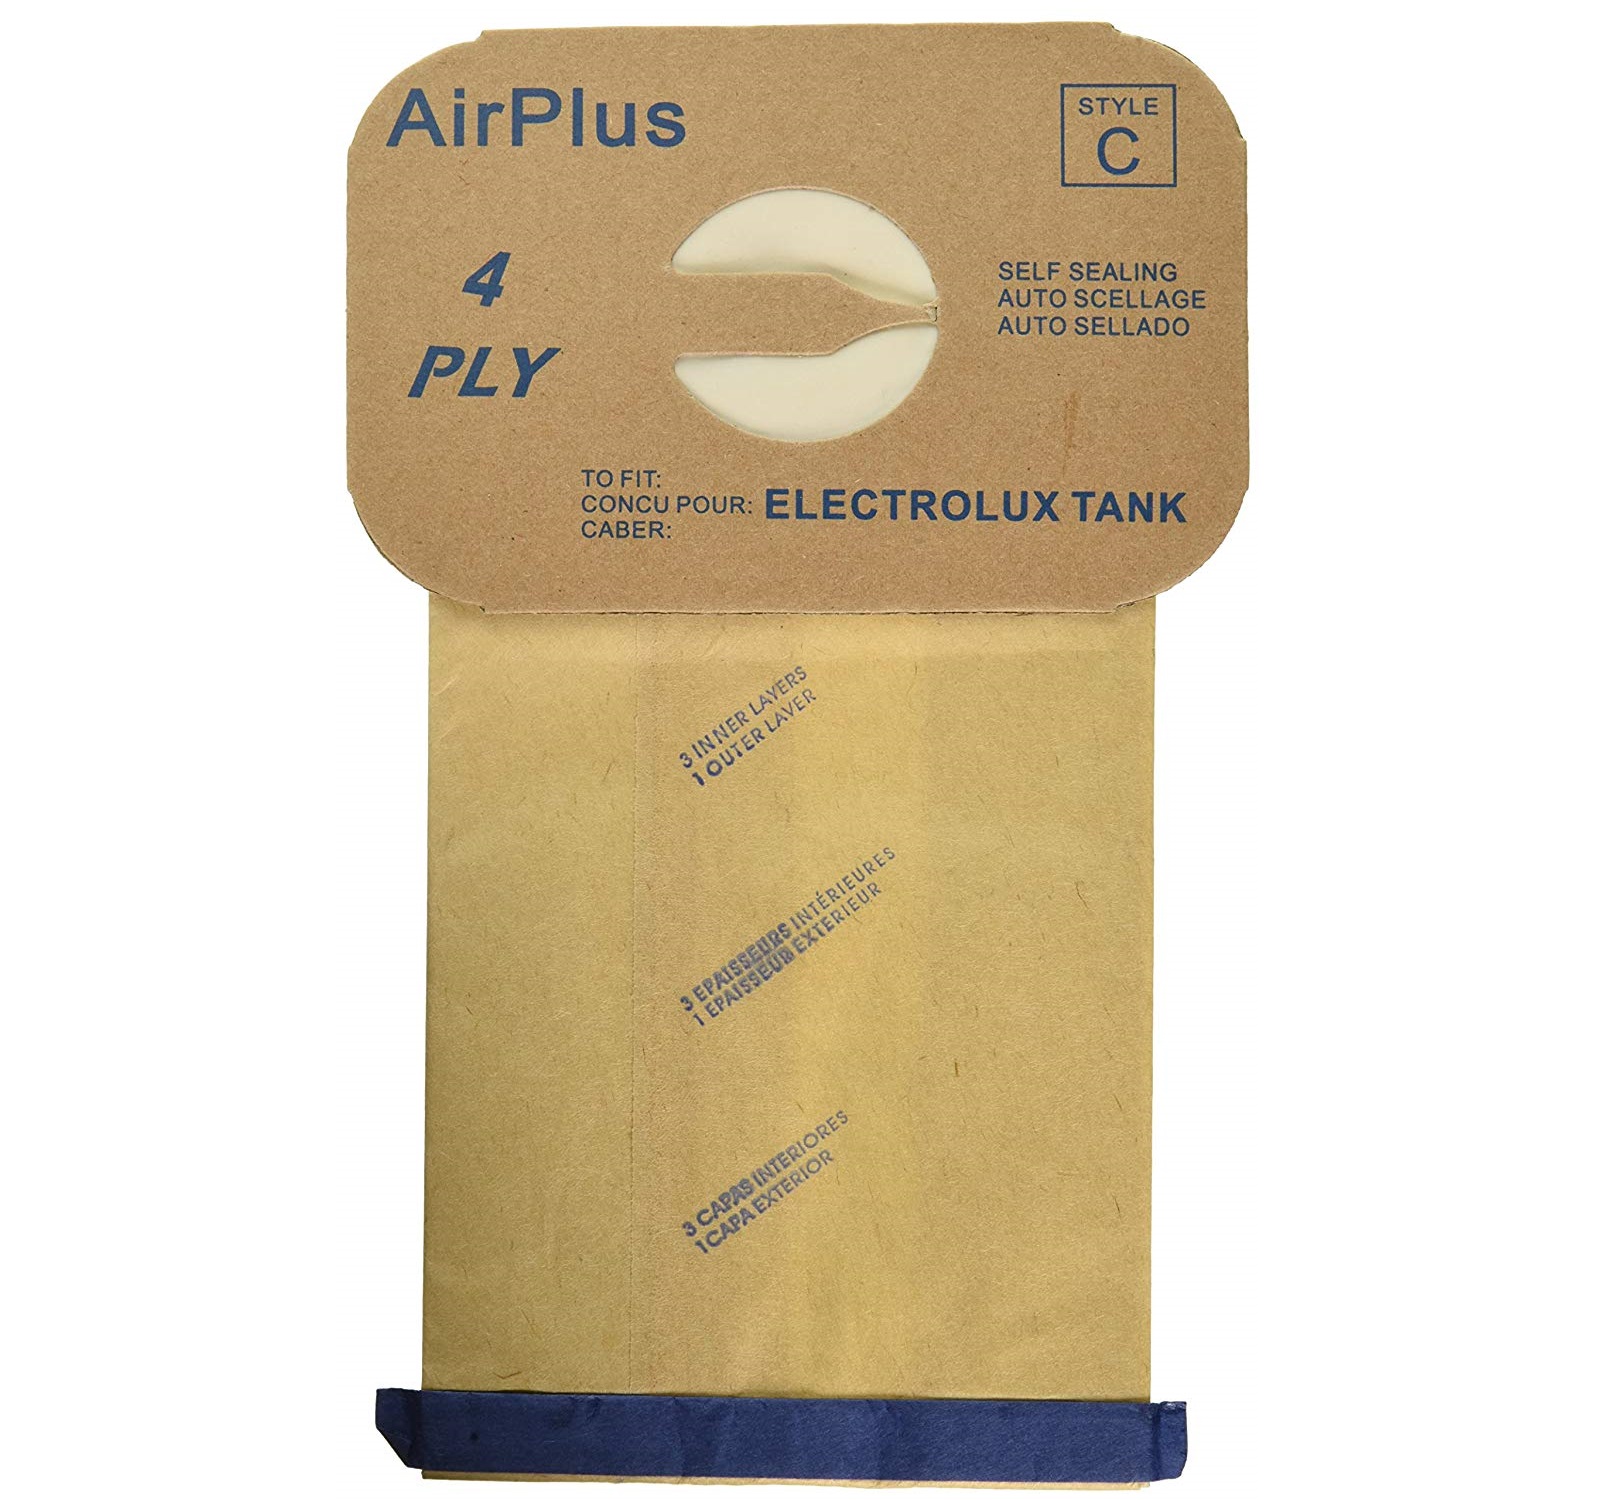 Canister Style C HEPA ALLERGY Vacuum Cleaner Bags for Aerus Electrolux 12-Pack 